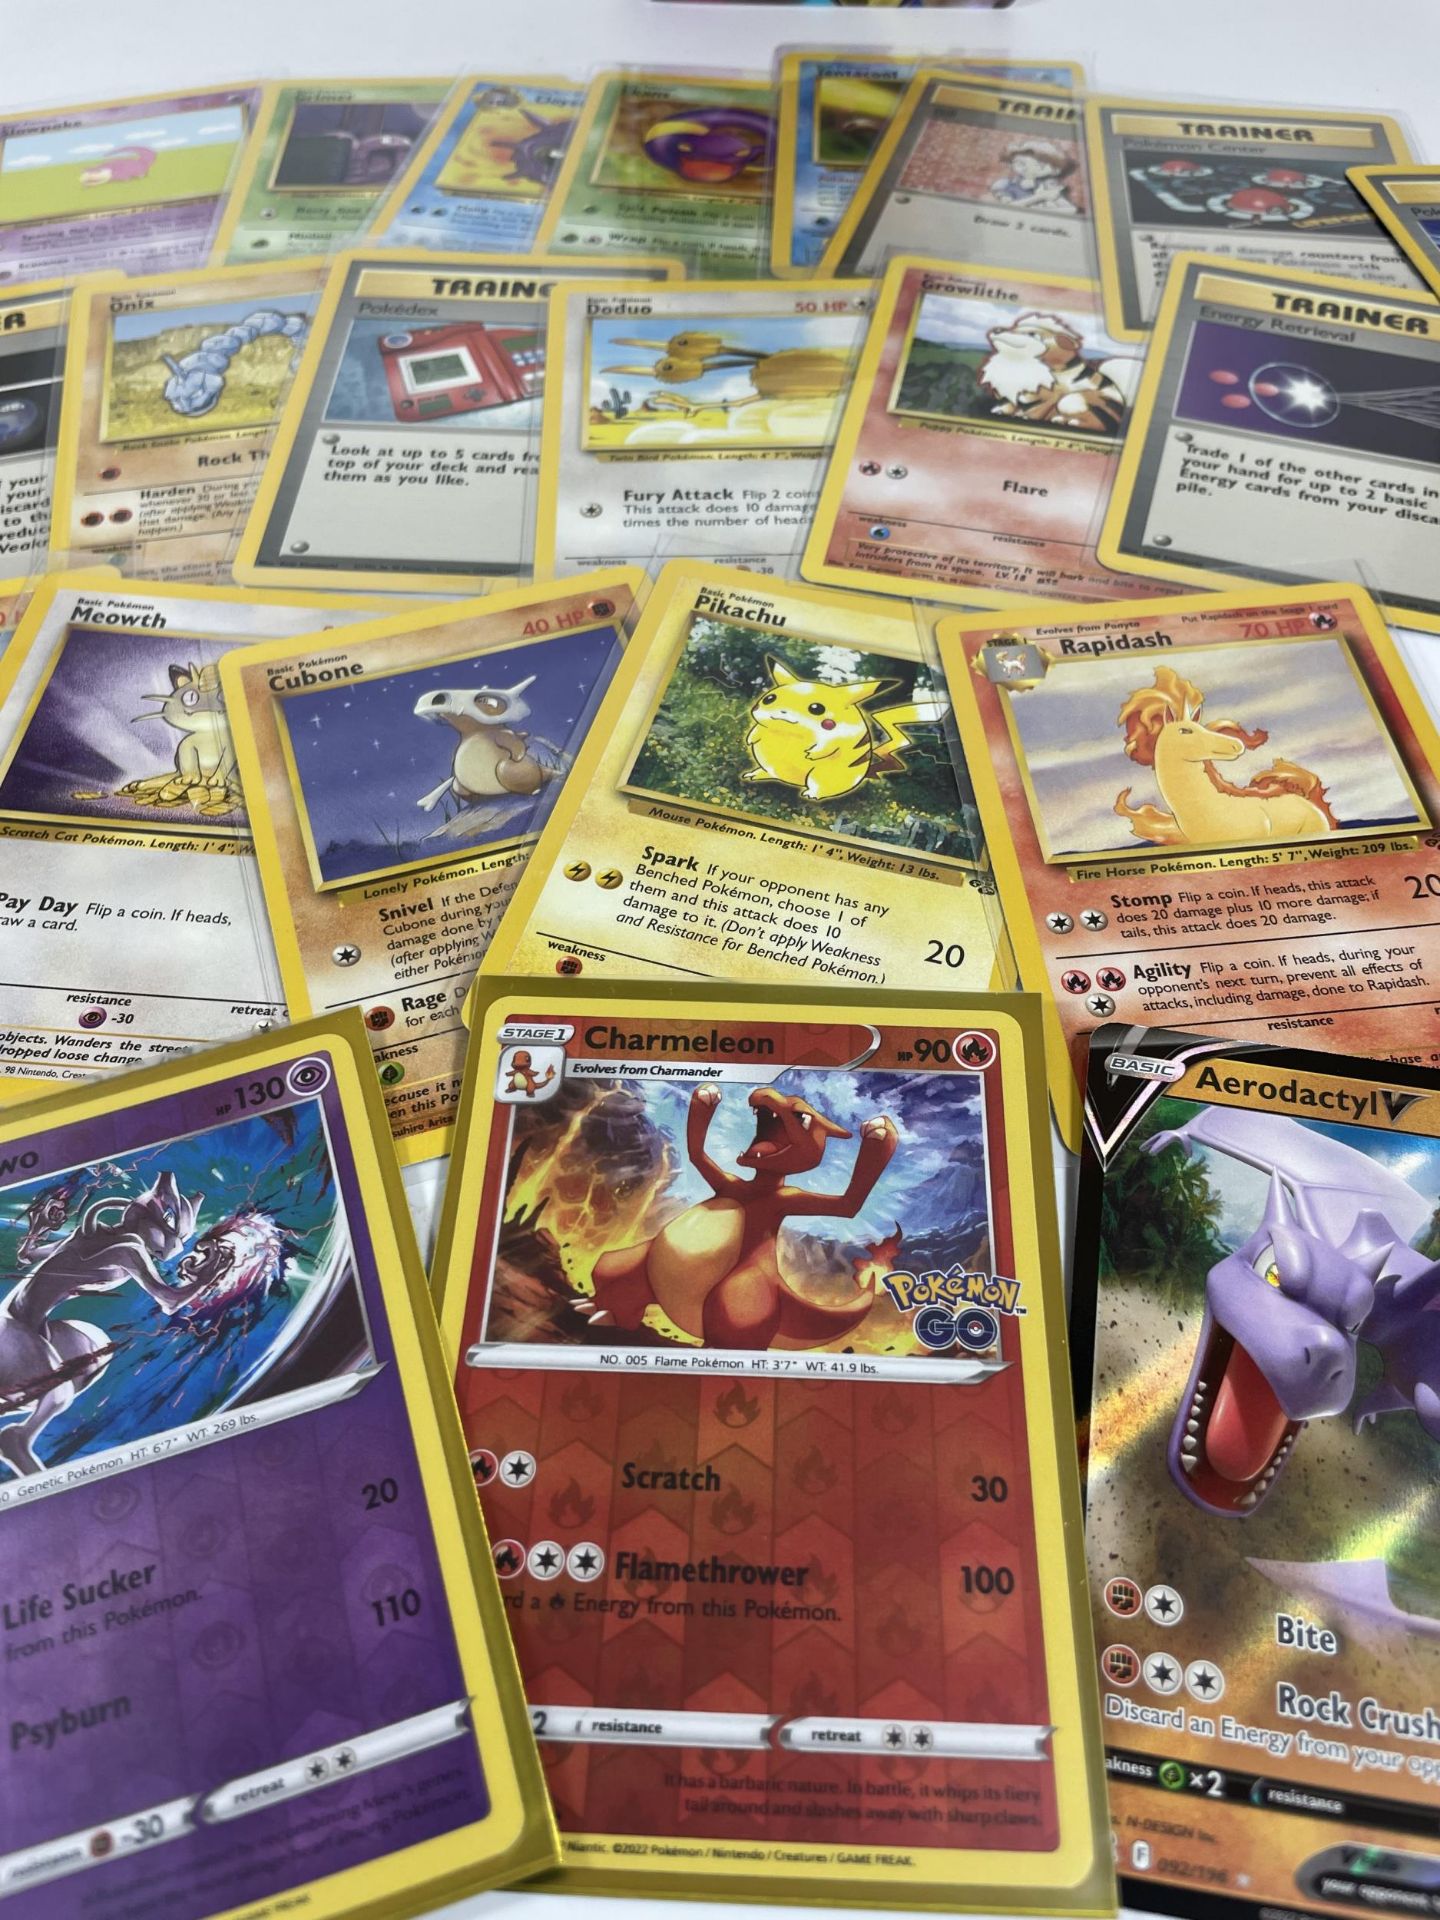 A SMALL POKEMON FOLDER OF CARDS - JUNGLE SET 1999 PIKACHU, FURTHER WOTC CARDS, MEWTWO RADIANT - Image 4 of 5